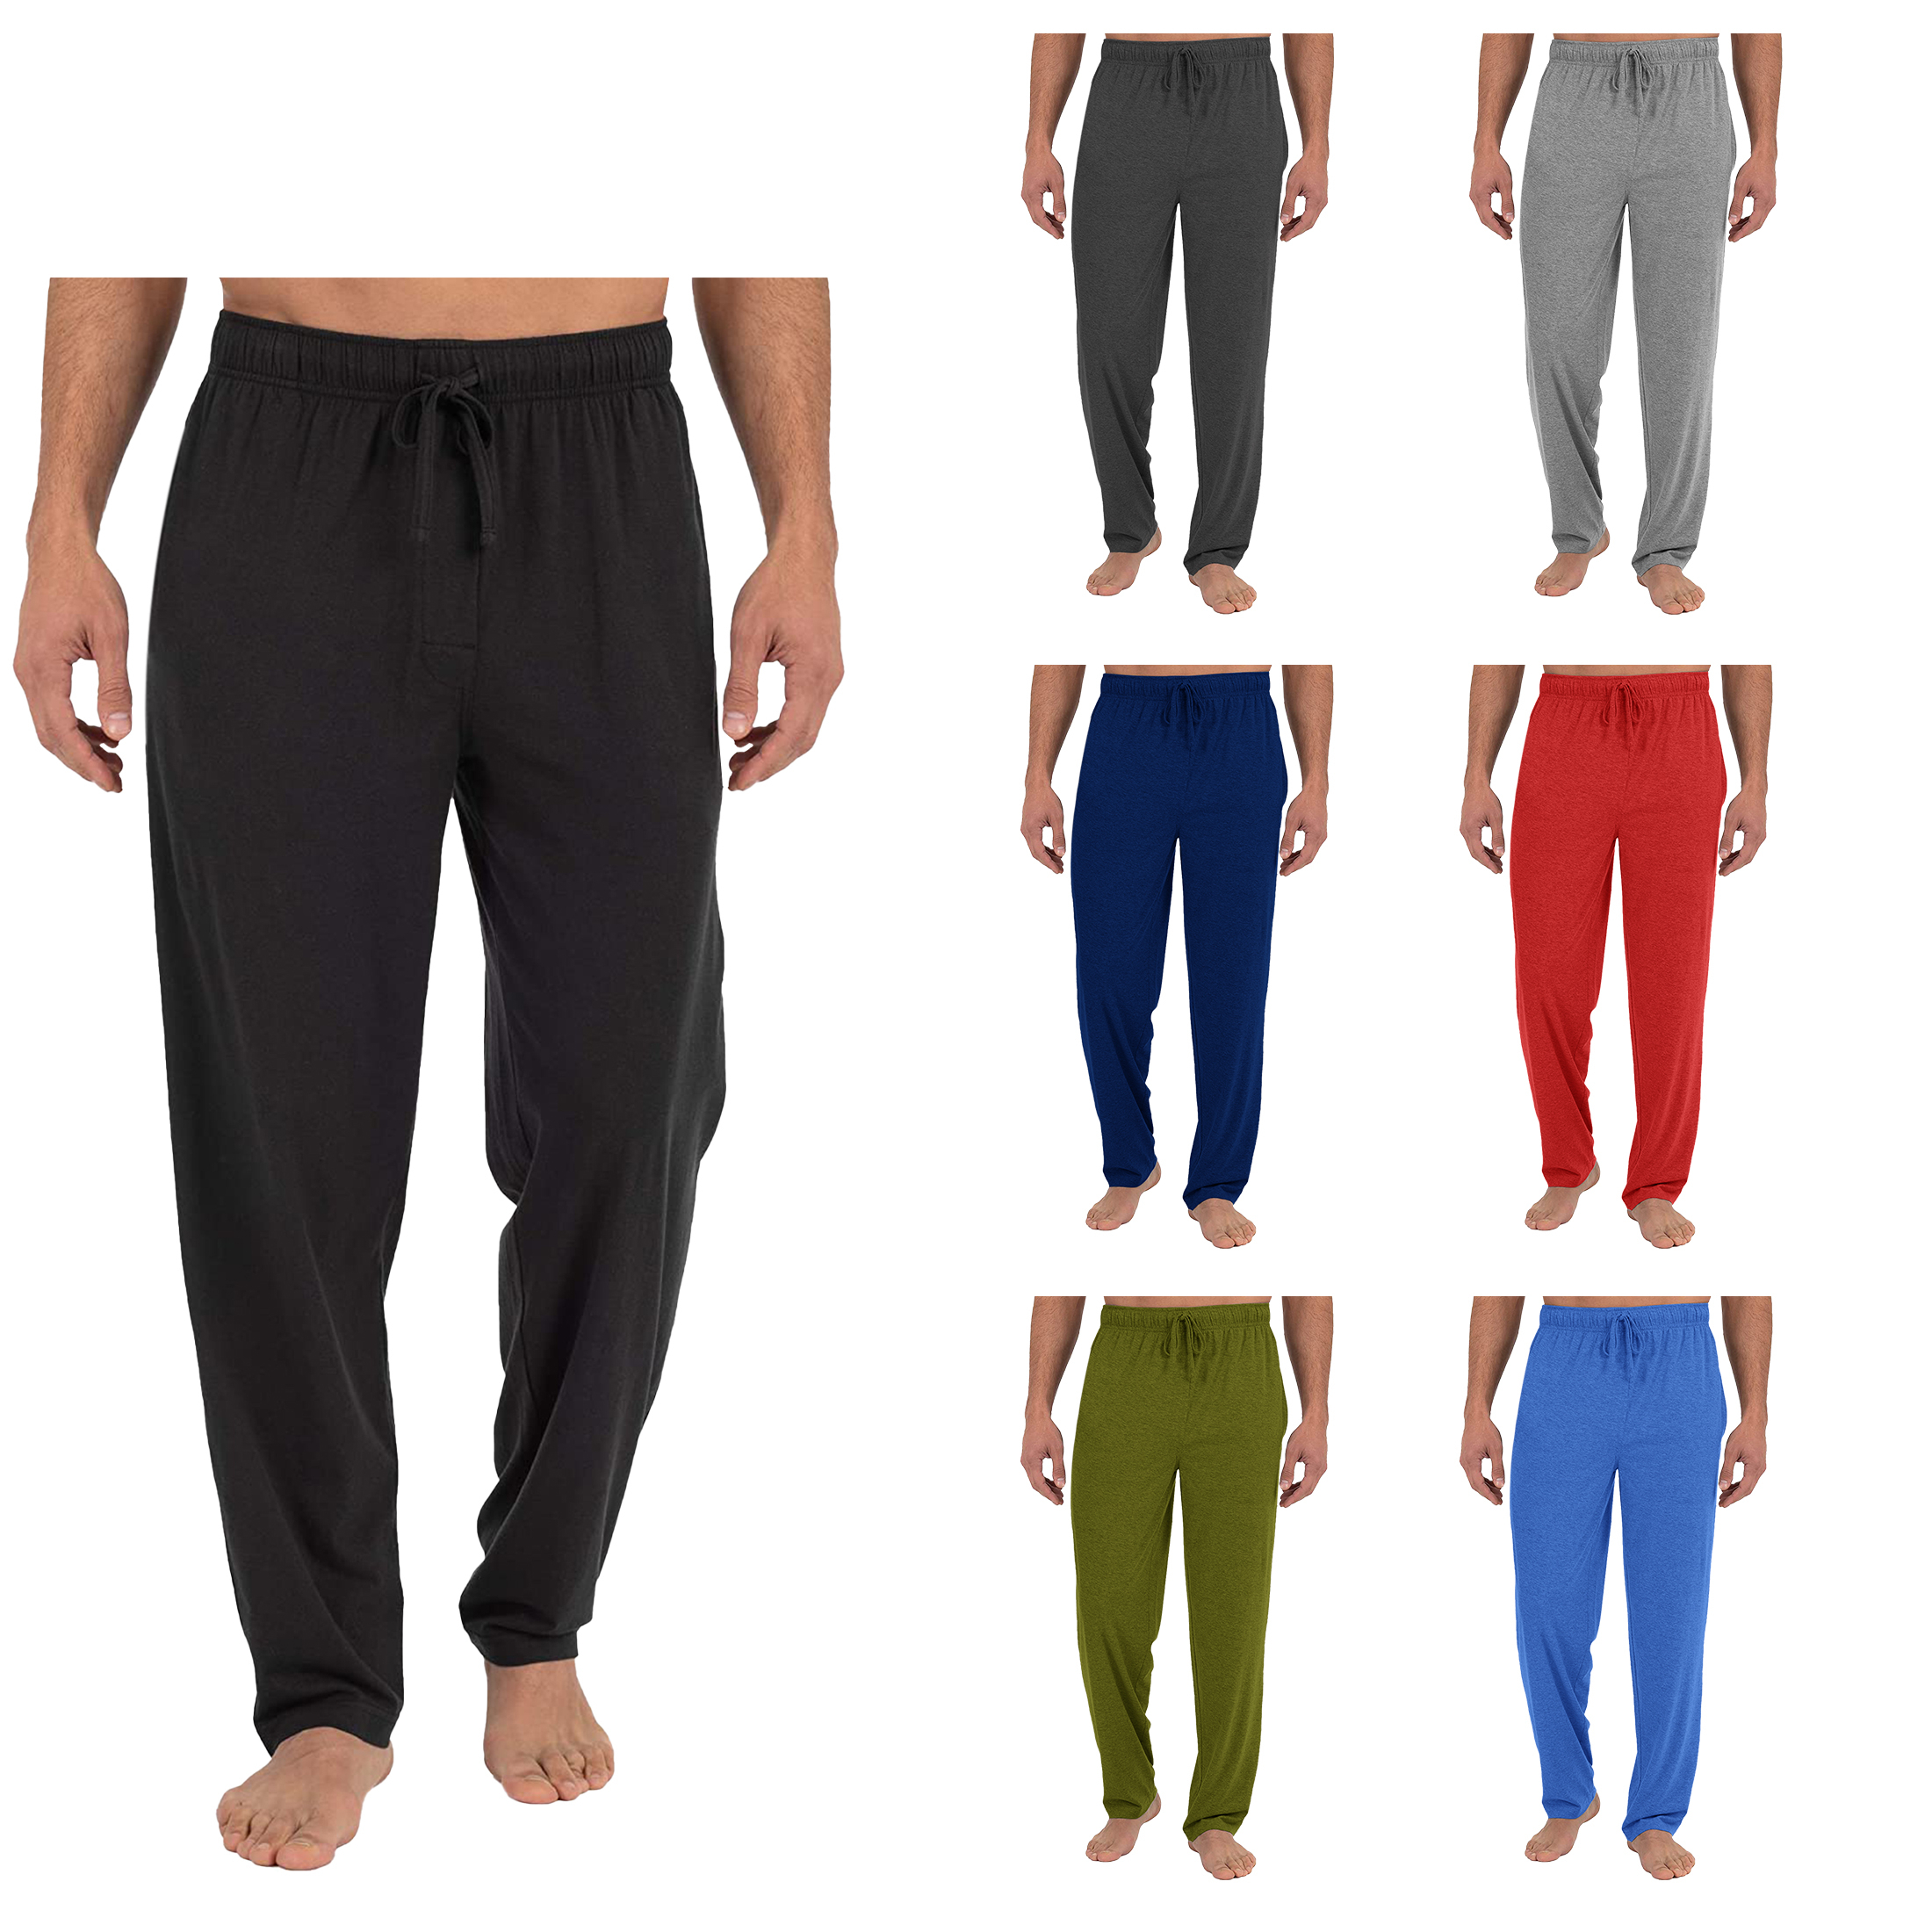 3-Pack Men's Solid Sleep Pajama Pants With Drawstring Jersey Knit Soft Straight-Fit Lounge Trousers - M